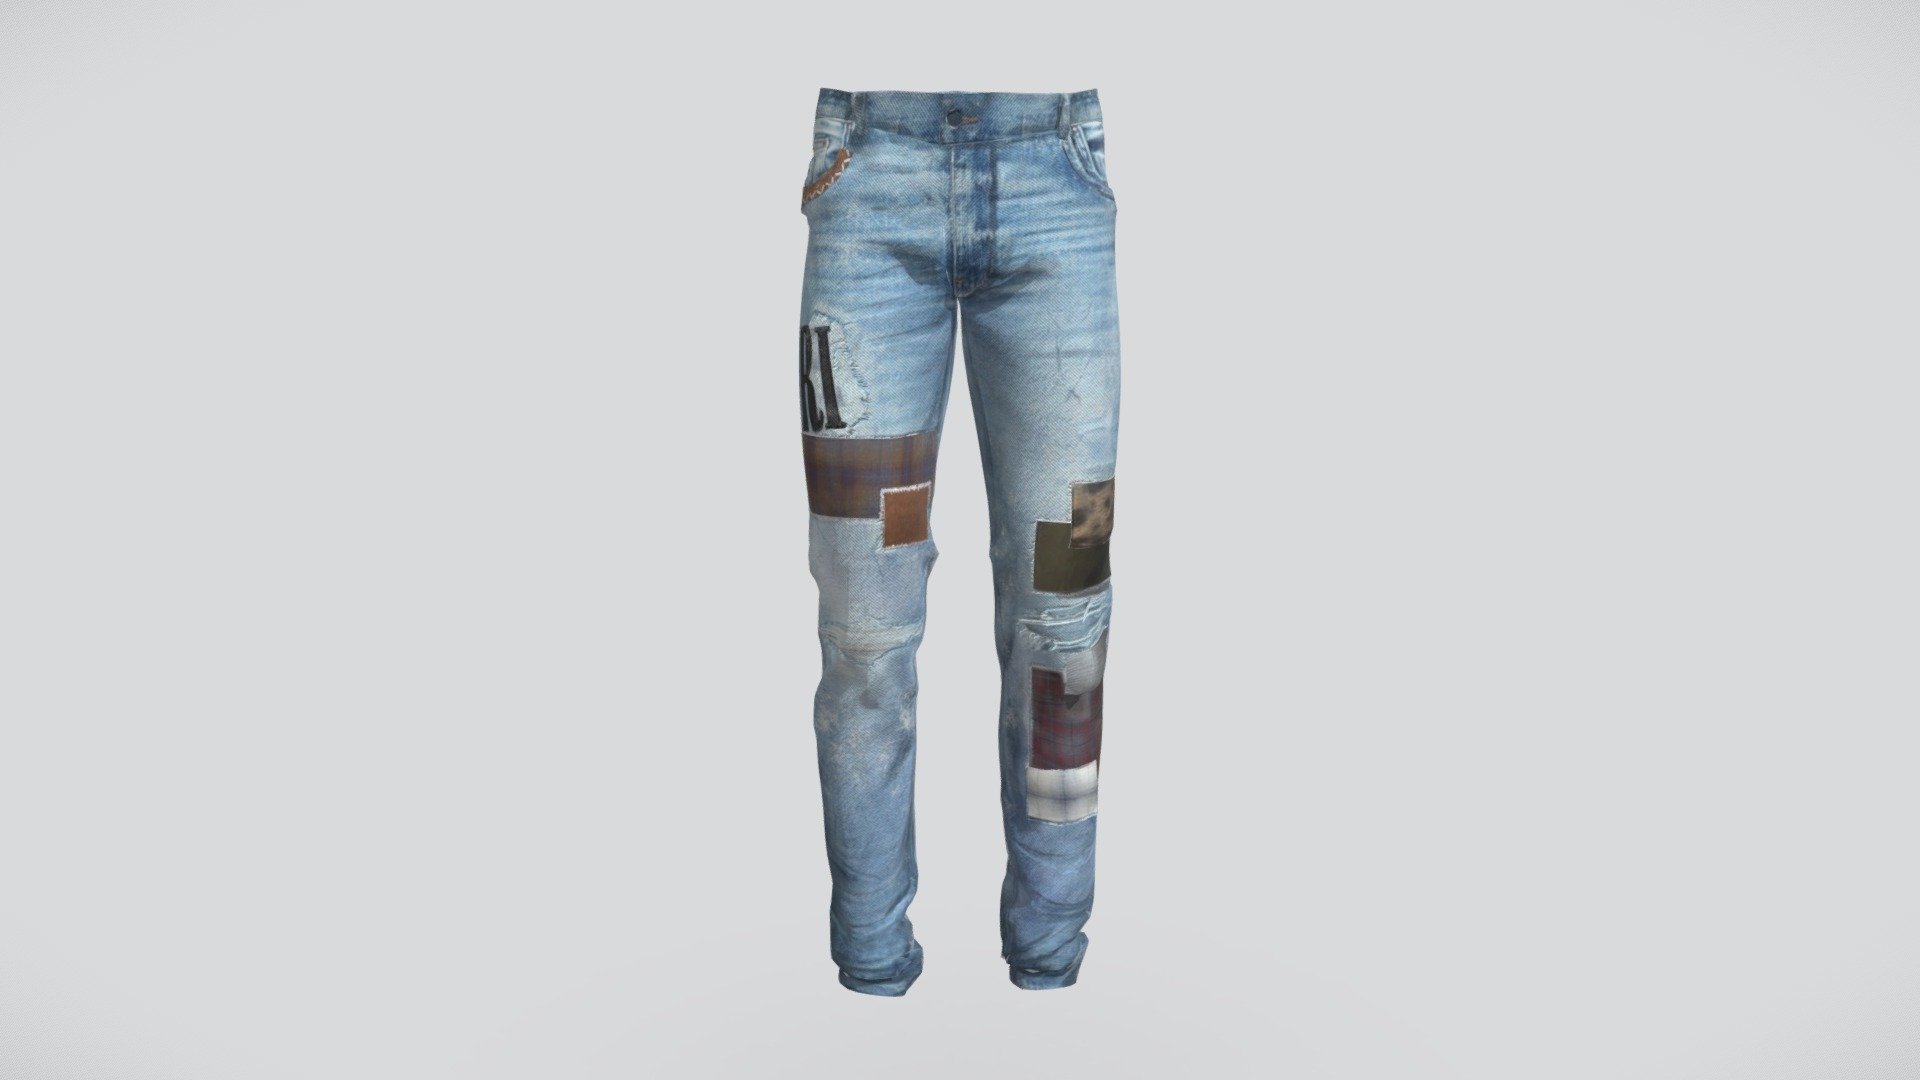 AMIRI Skinny Patchwork Jeans. 3D model. For man. Jeans Amiri with patchwork. This jeans was created in Clo3D. This is original Amiri jeans. https://www.farfetch.com/ru/shopping/men/amiri&ndash;item-14508433.aspx

Licence: You are free to use this model in any of your projects. Please remember to credit Virtual Rugs and subscribe for more upcoming 3d models coming soon - AMIRI Skinny Patchwork Jeans - 3D model by virtualrags 3d model